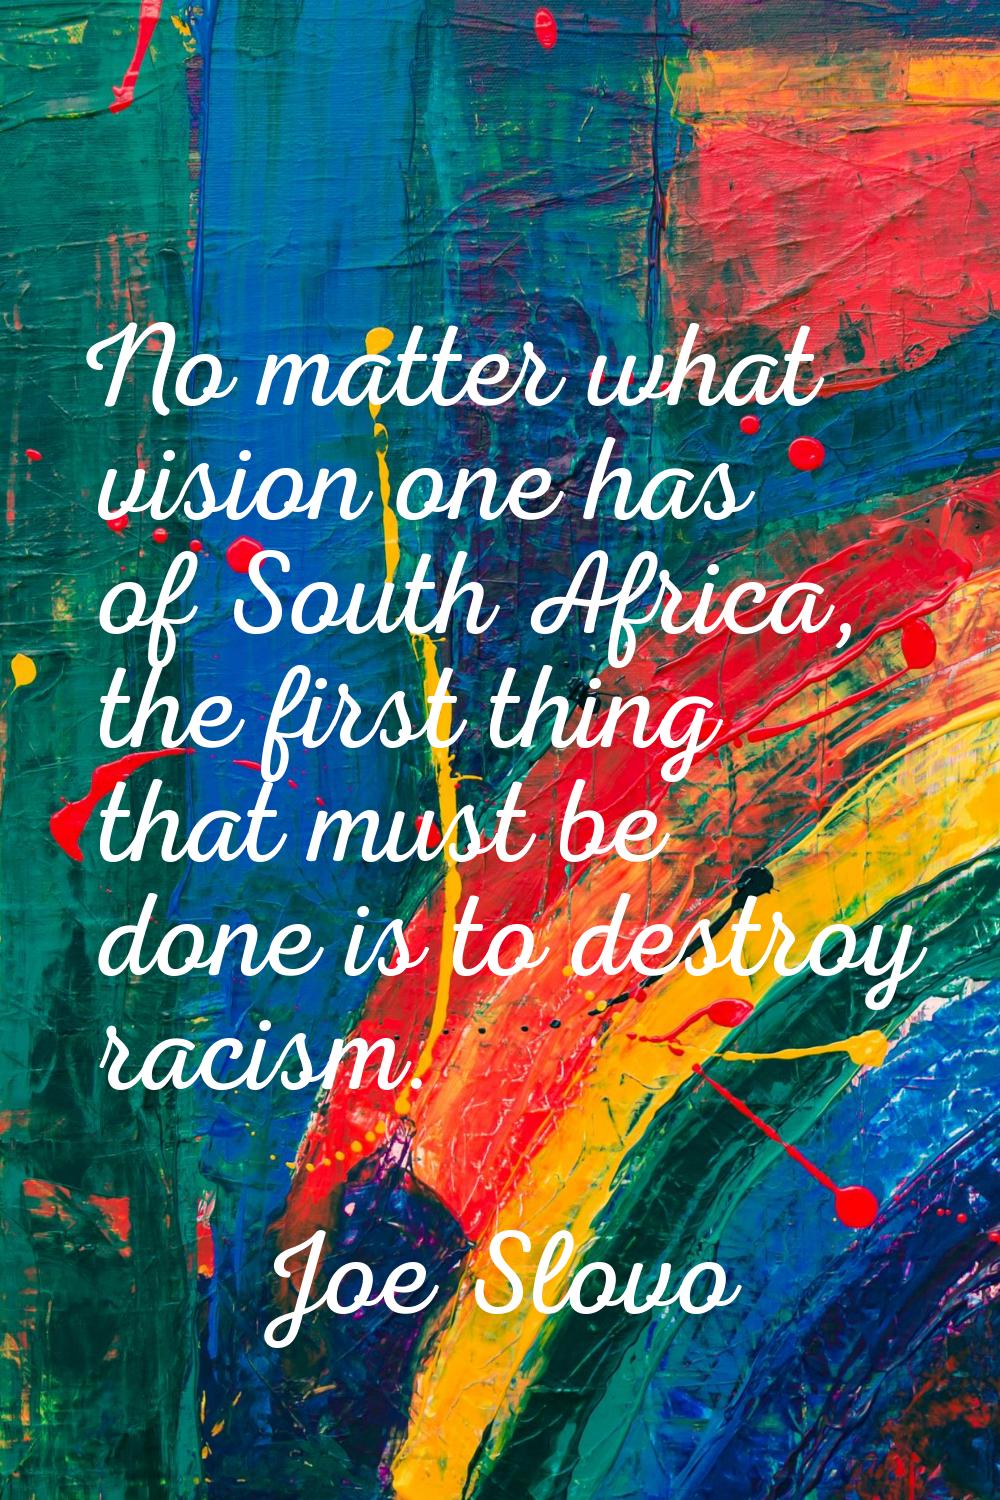 No matter what vision one has of South Africa, the first thing that must be done is to destroy raci